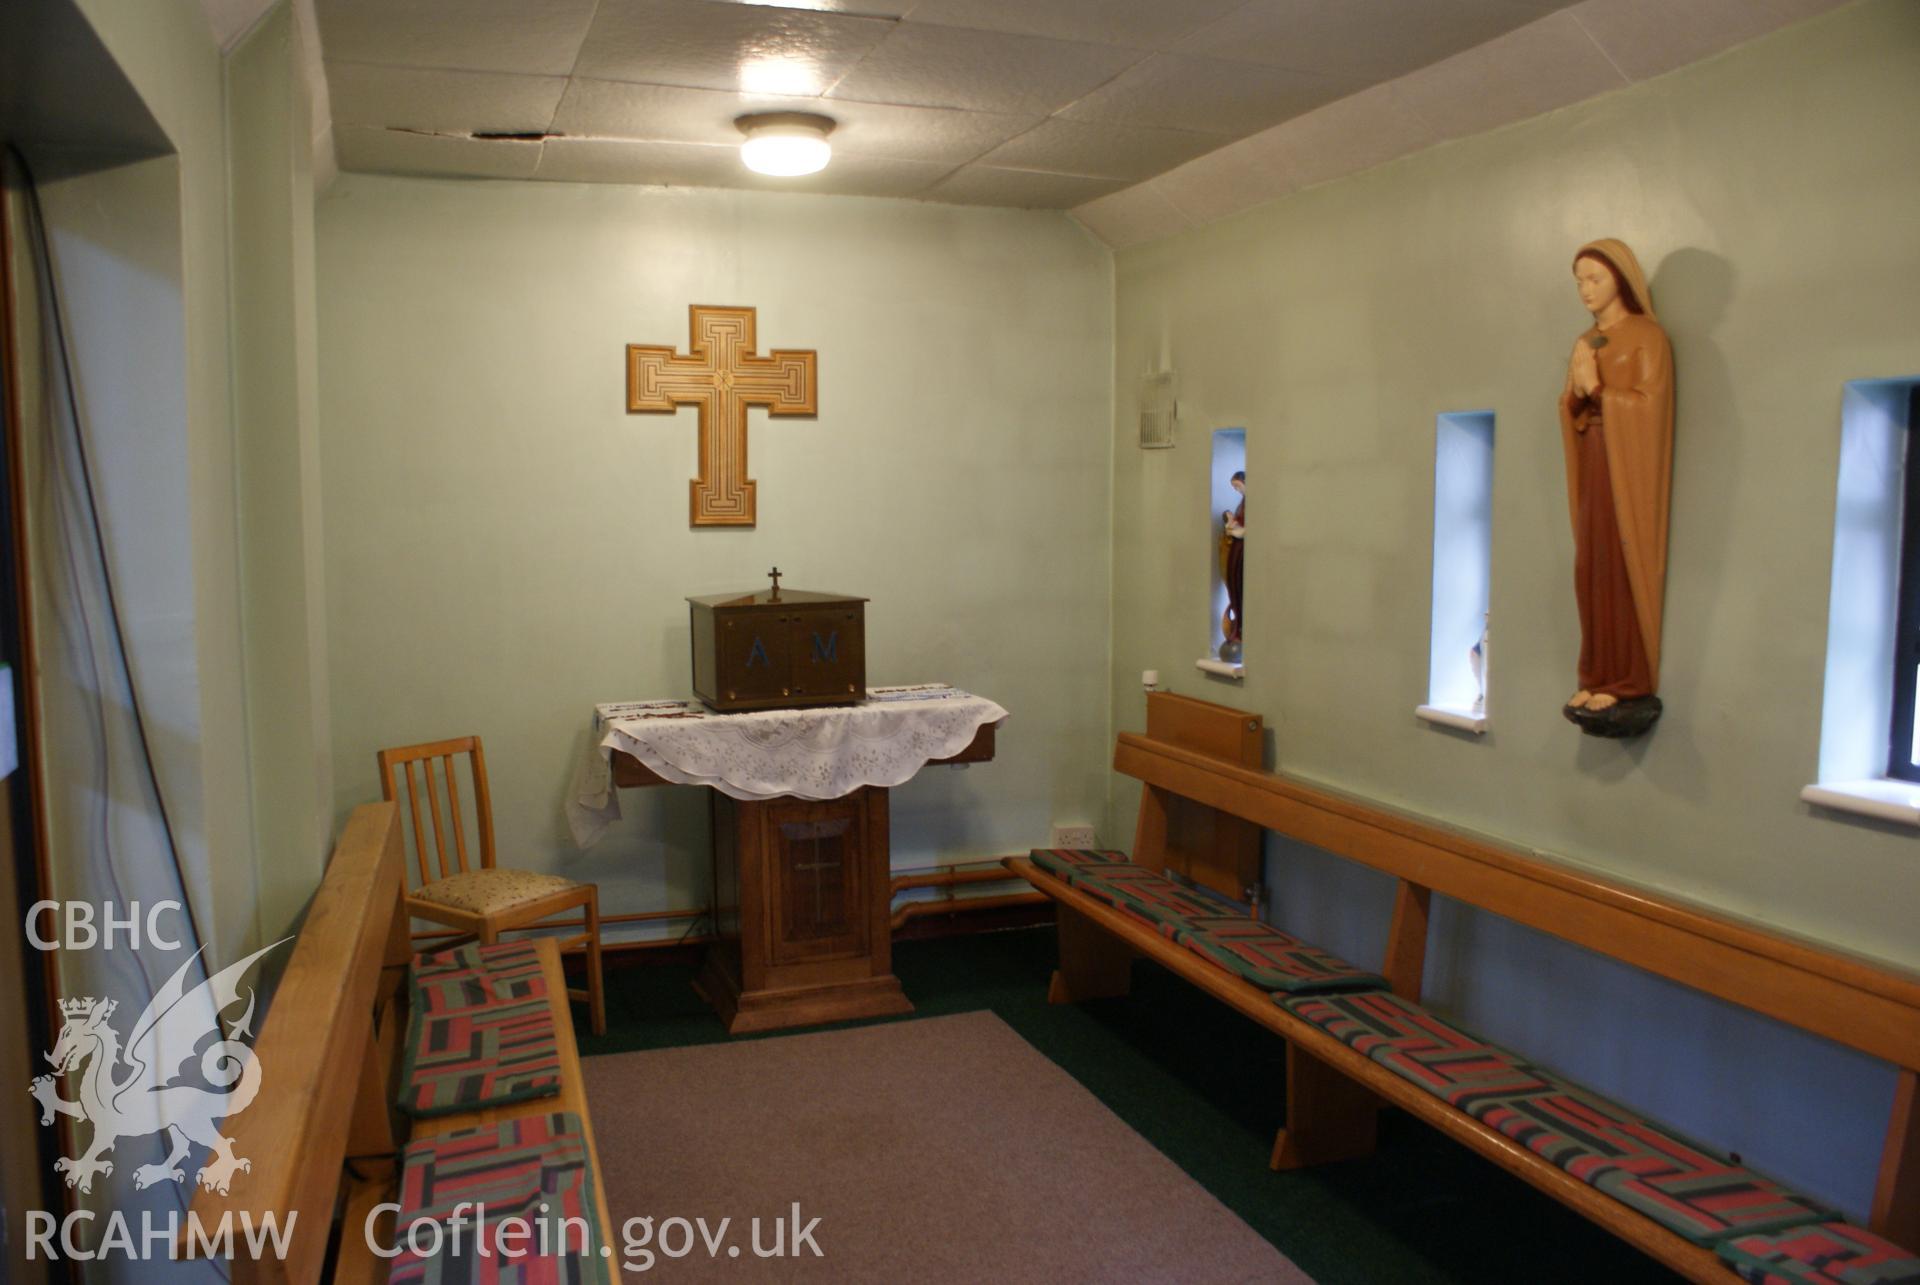 Digital colour photograph showing painted wooden statue of St Dyfrig in the former baptistry at St Dyfrig's Catholic church, Treforest.